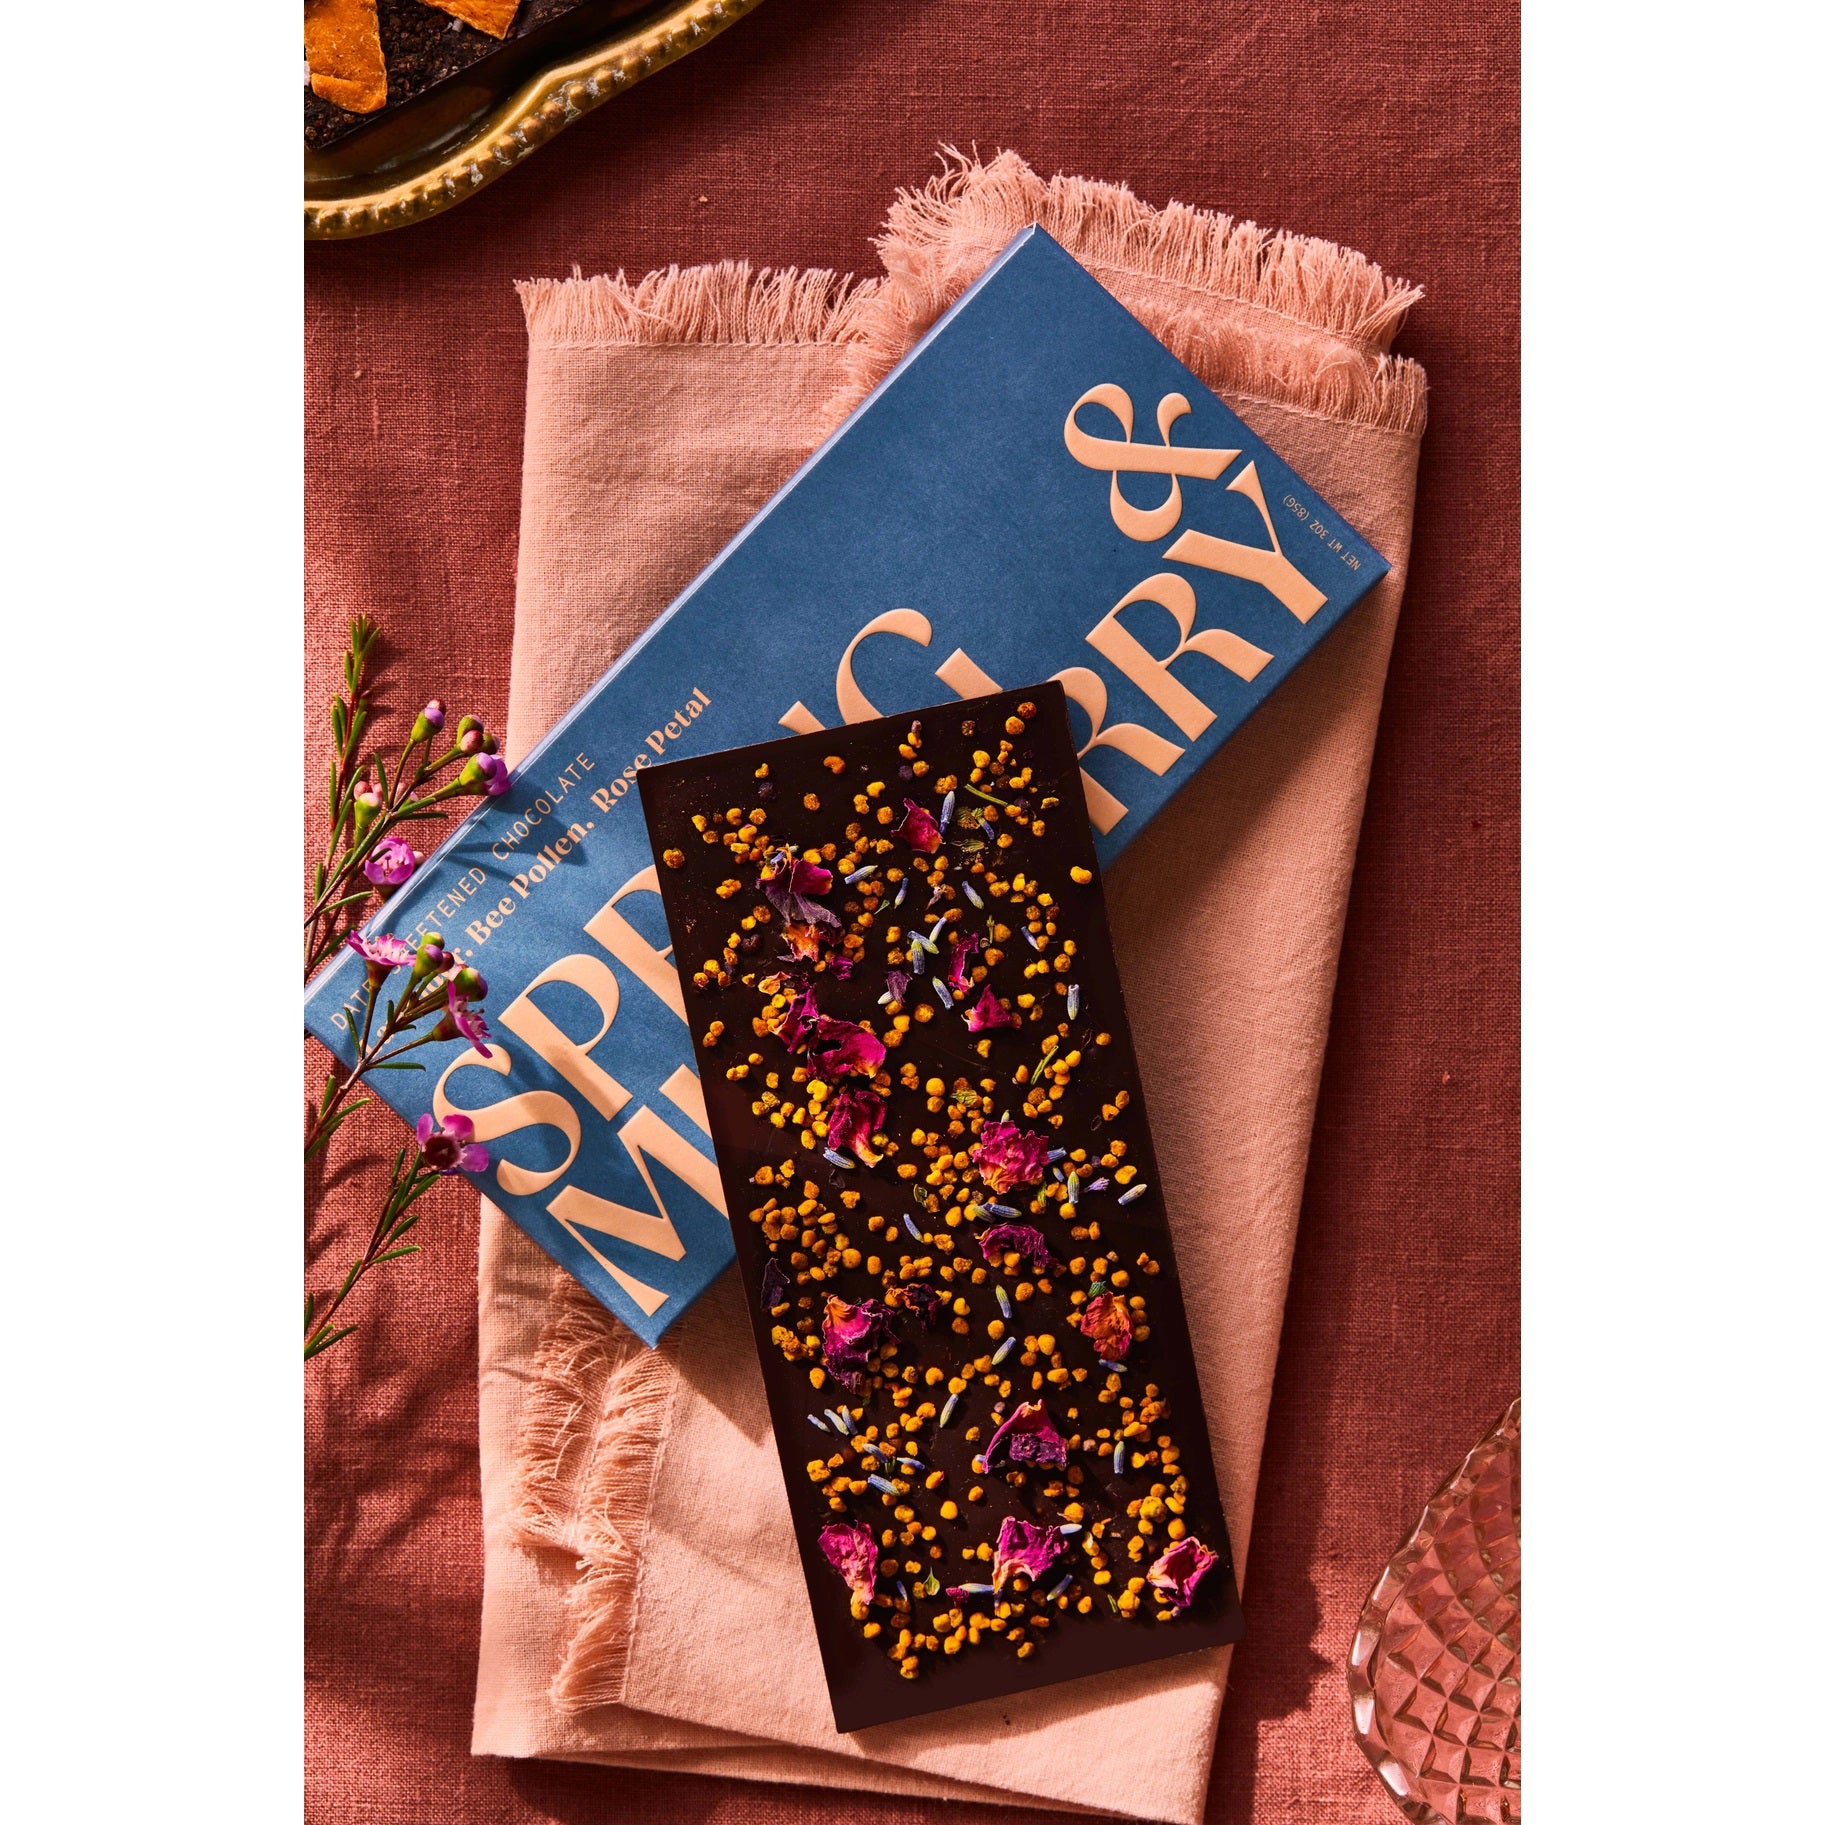 SPRING & MULBERRY - LAVENDER, BEE POLLEN AND ROSE PETAL CHOCOLATE BAR